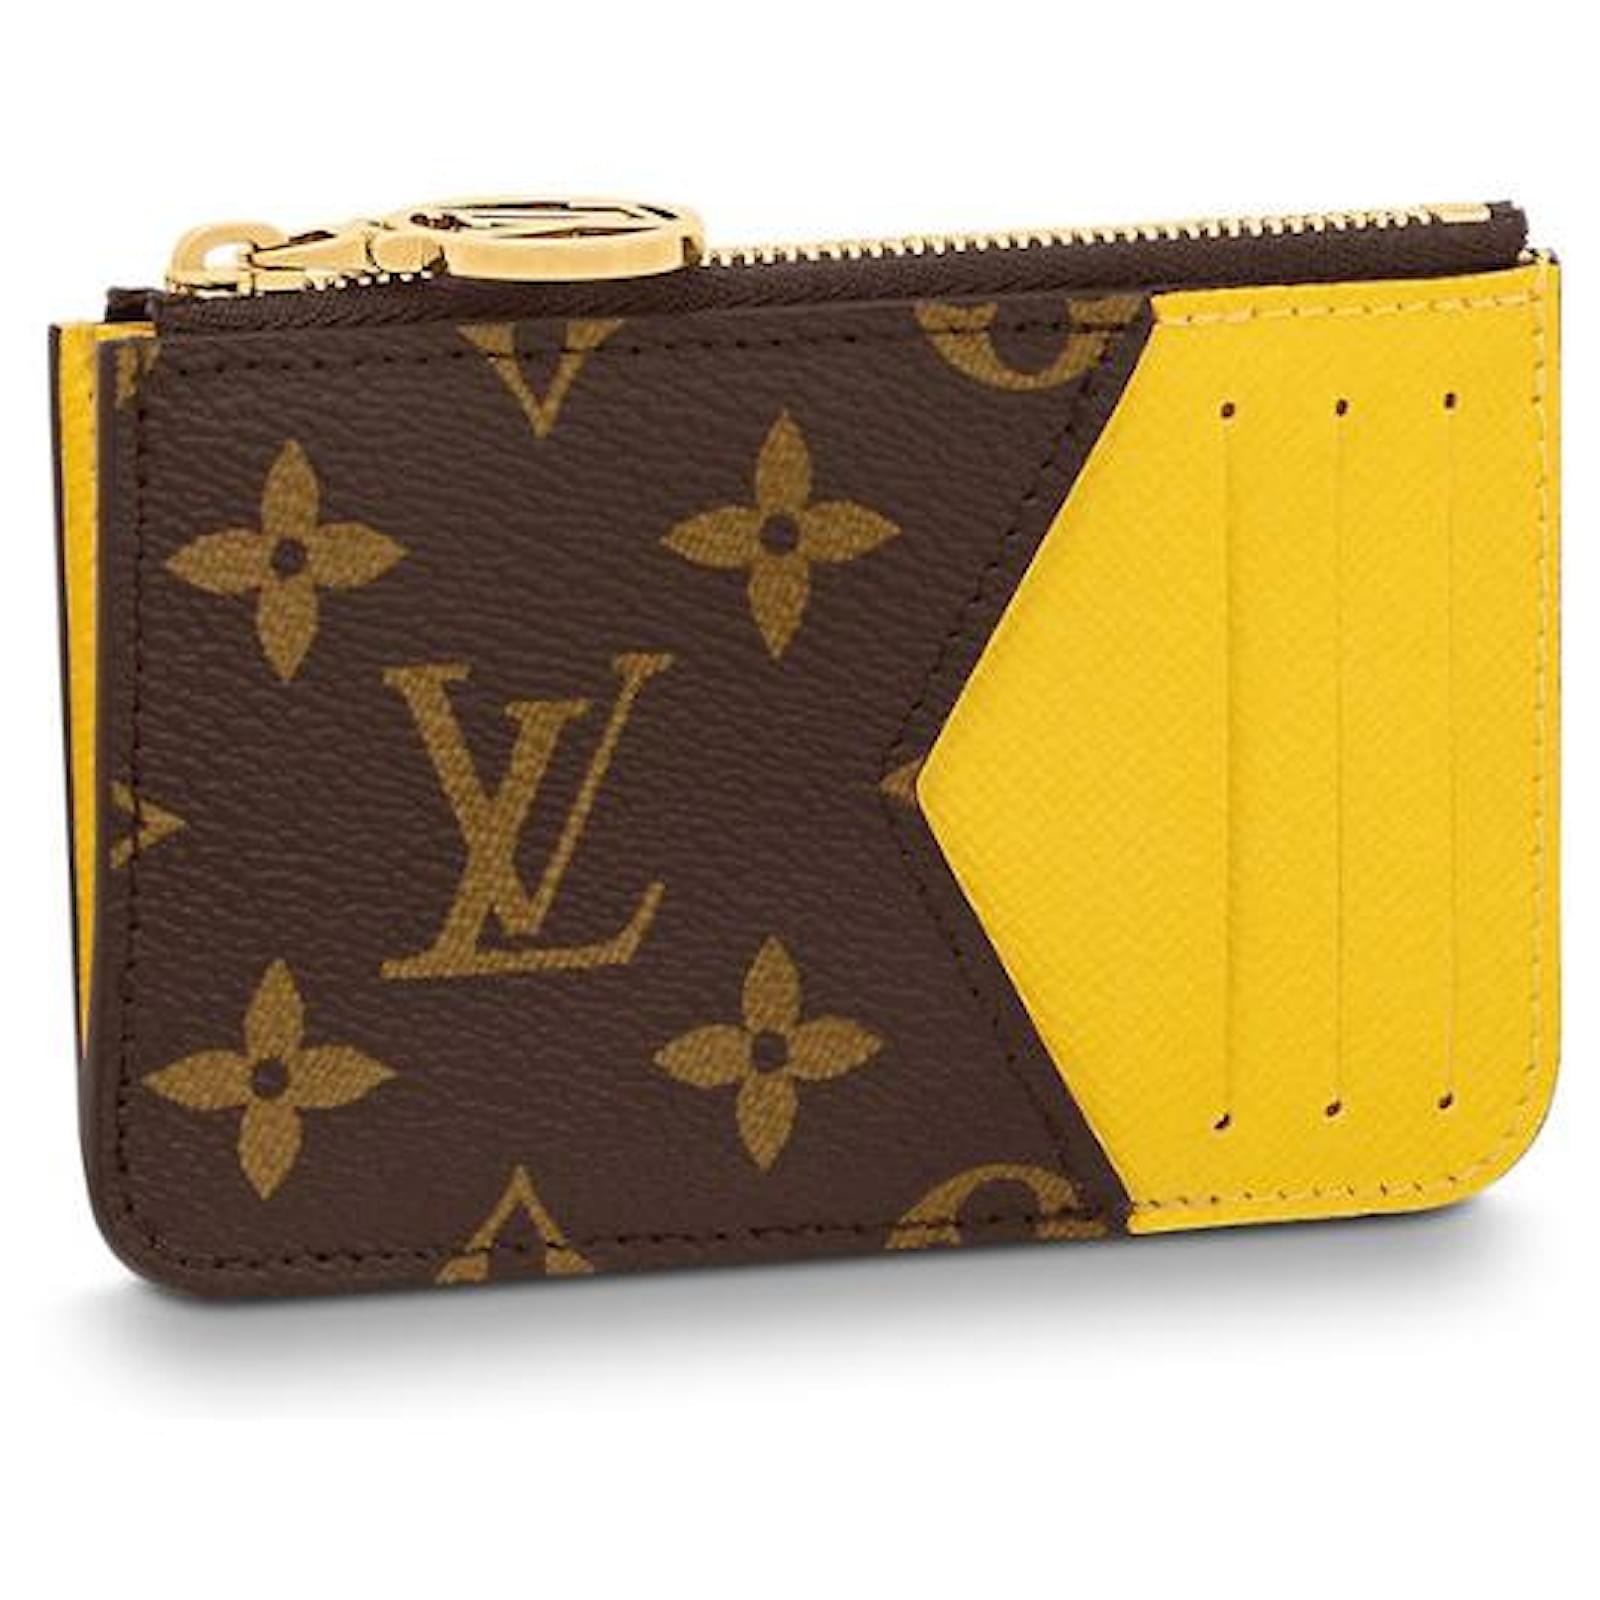 Louis Vuitton Recto Card Holder vs Juliette Wallet-WHICH ONE IS BETTER? 